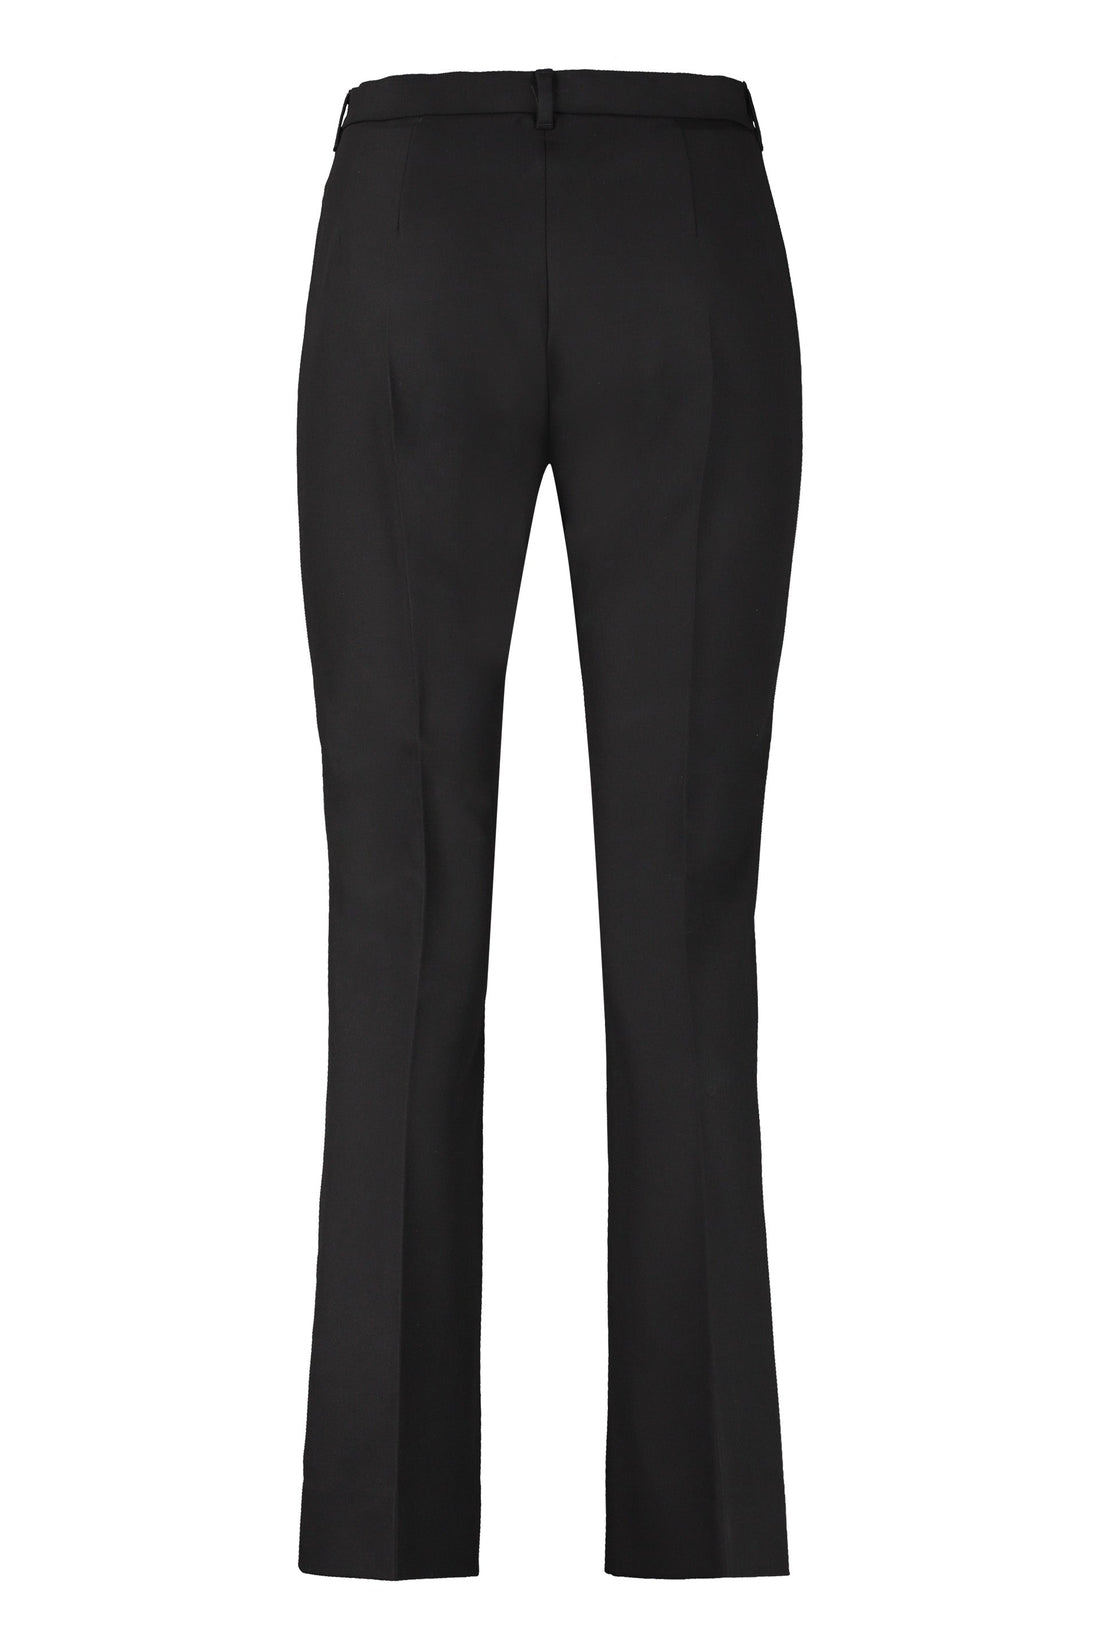 S MAX MARA-OUTLET-SALE-Fatina cropped trousers-ARCHIVIST